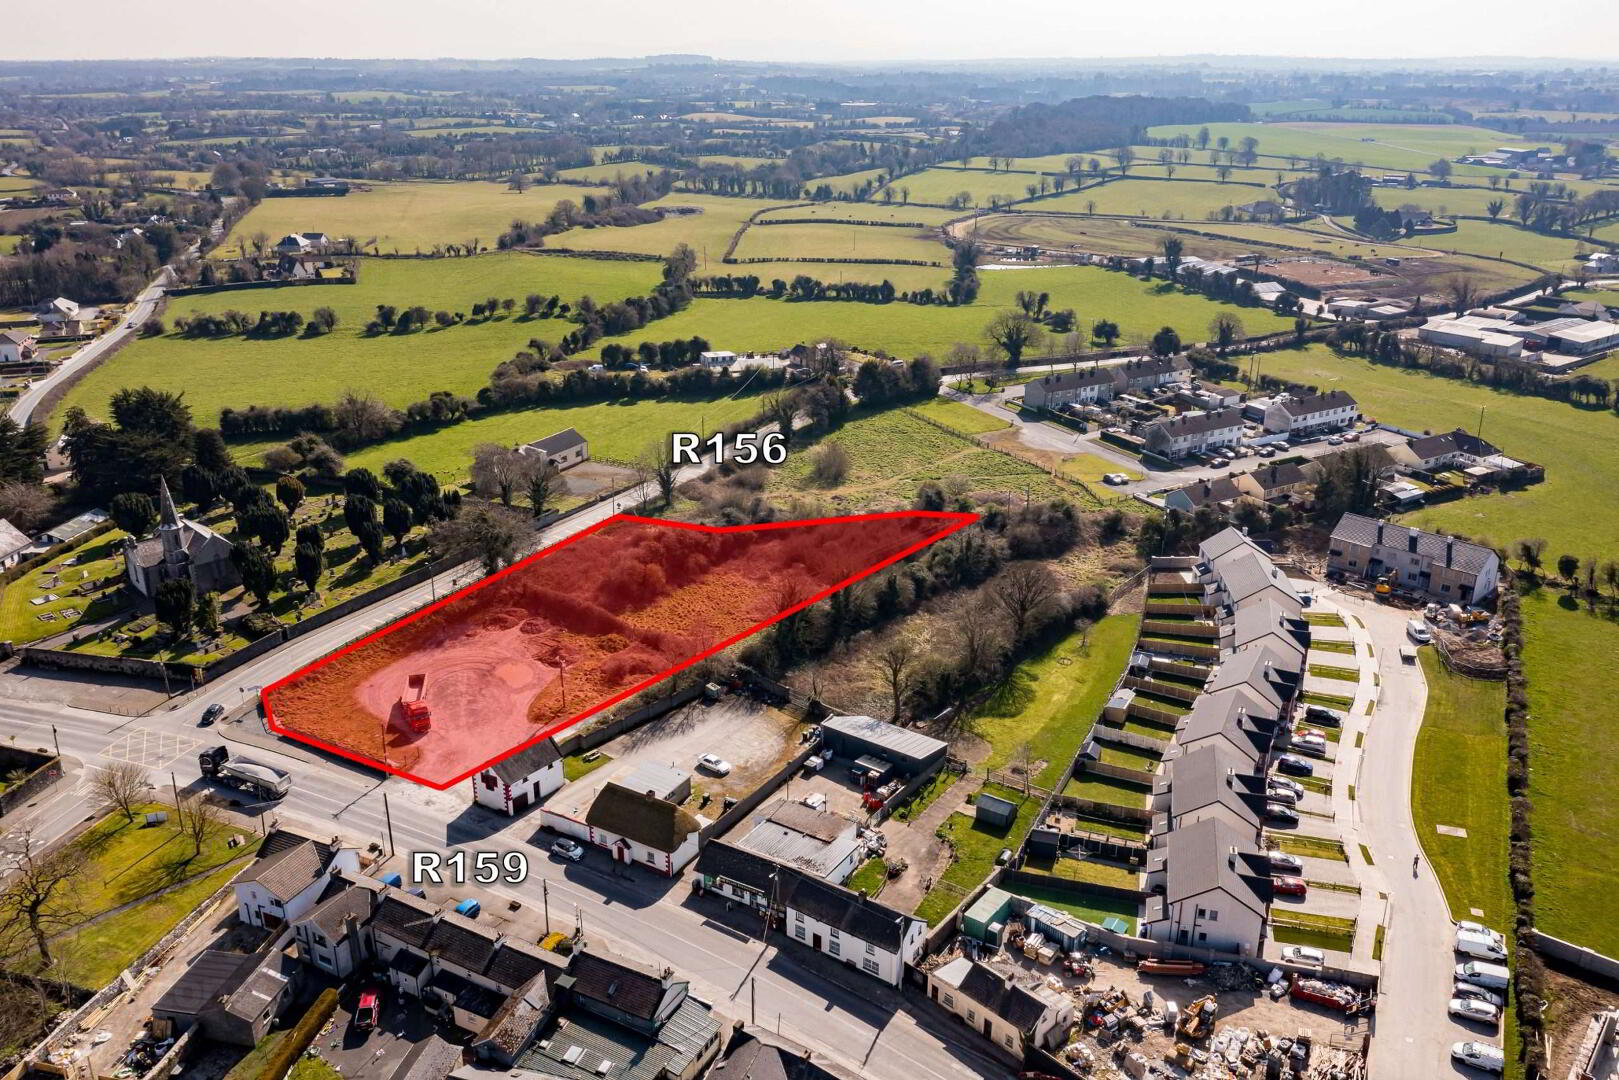 P 1.48 Acres With F. P. For, 26 Residential Units -